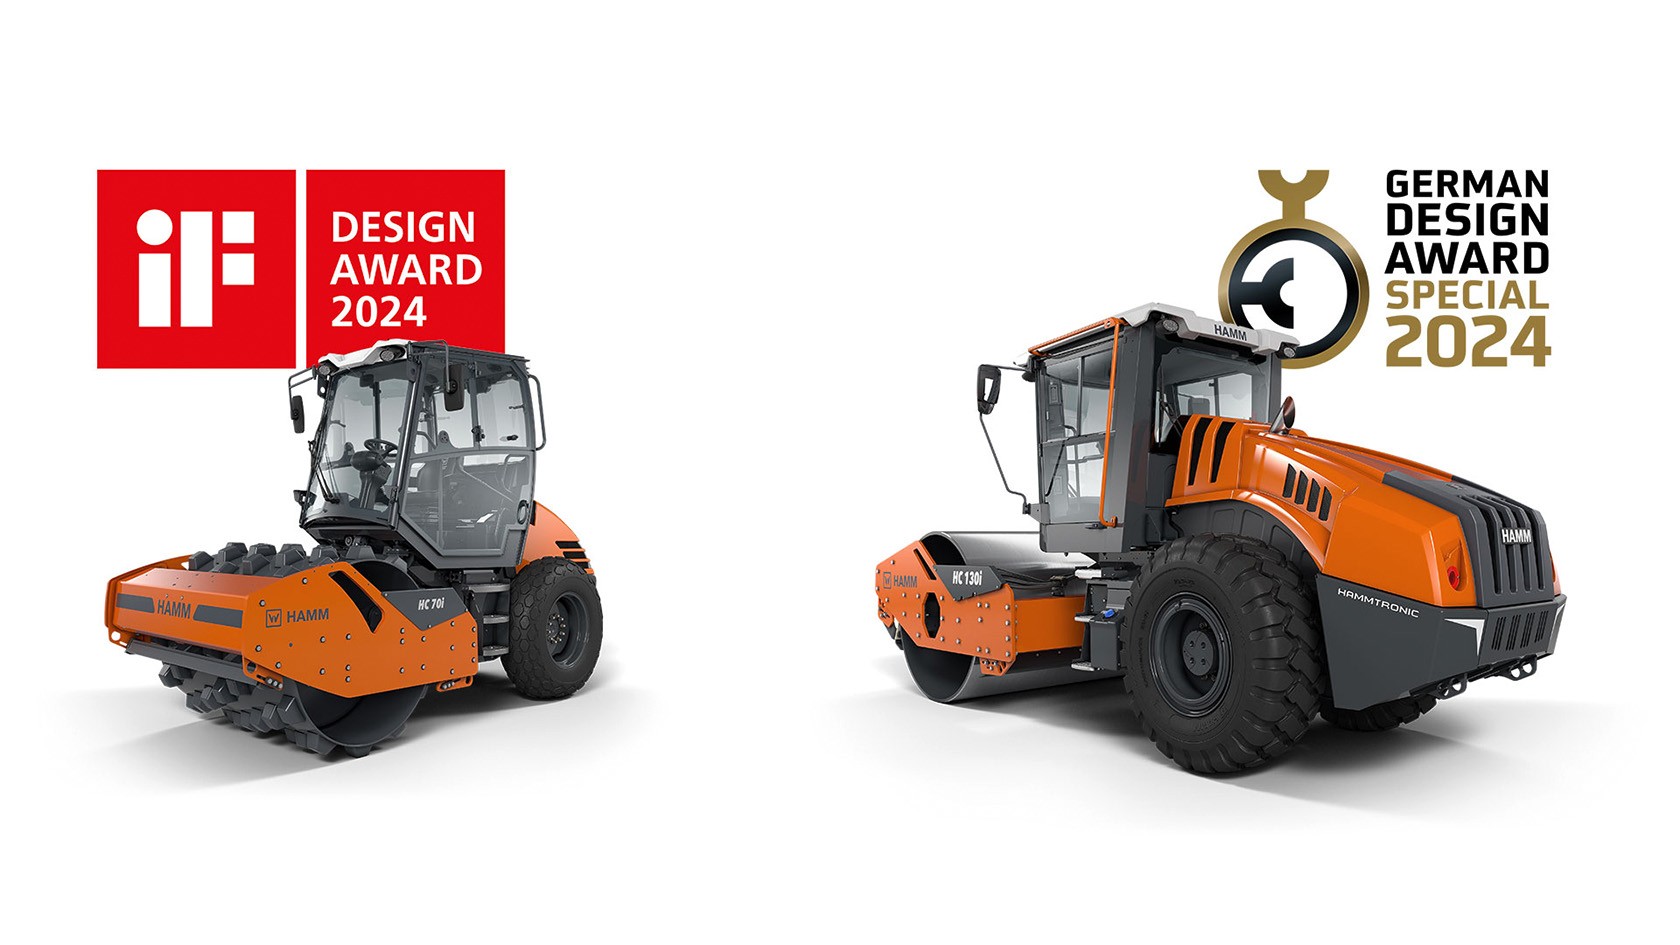 HC CompactLine series and compactors with iF Design Award 2024 logo and German Design Award 2024 logo